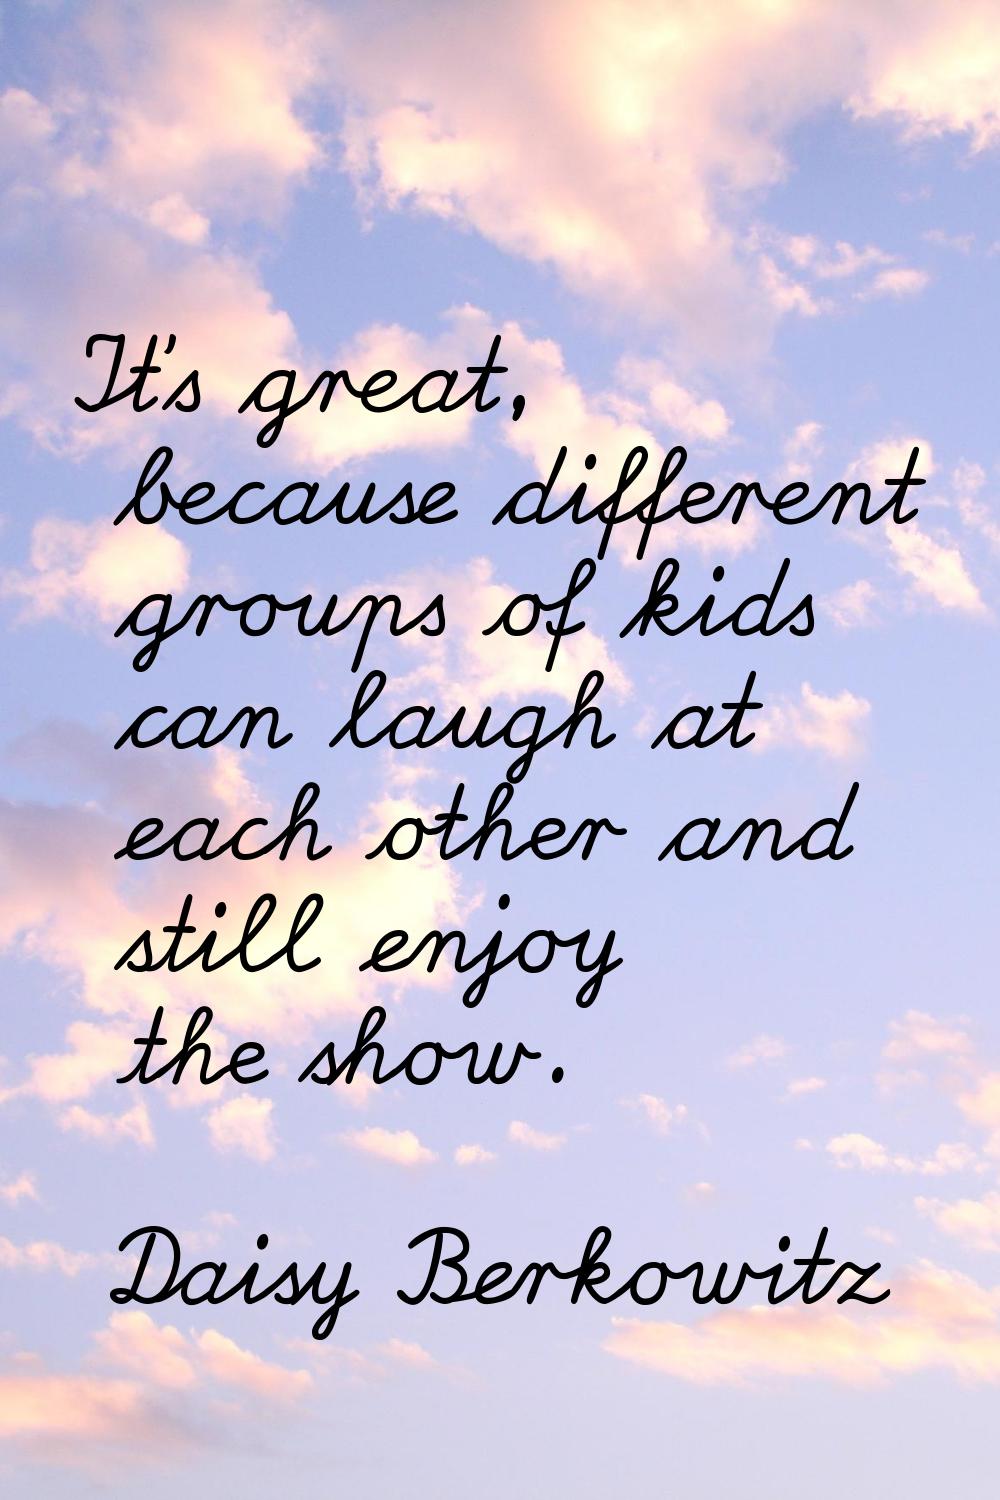 It's great, because different groups of kids can laugh at each other and still enjoy the show.